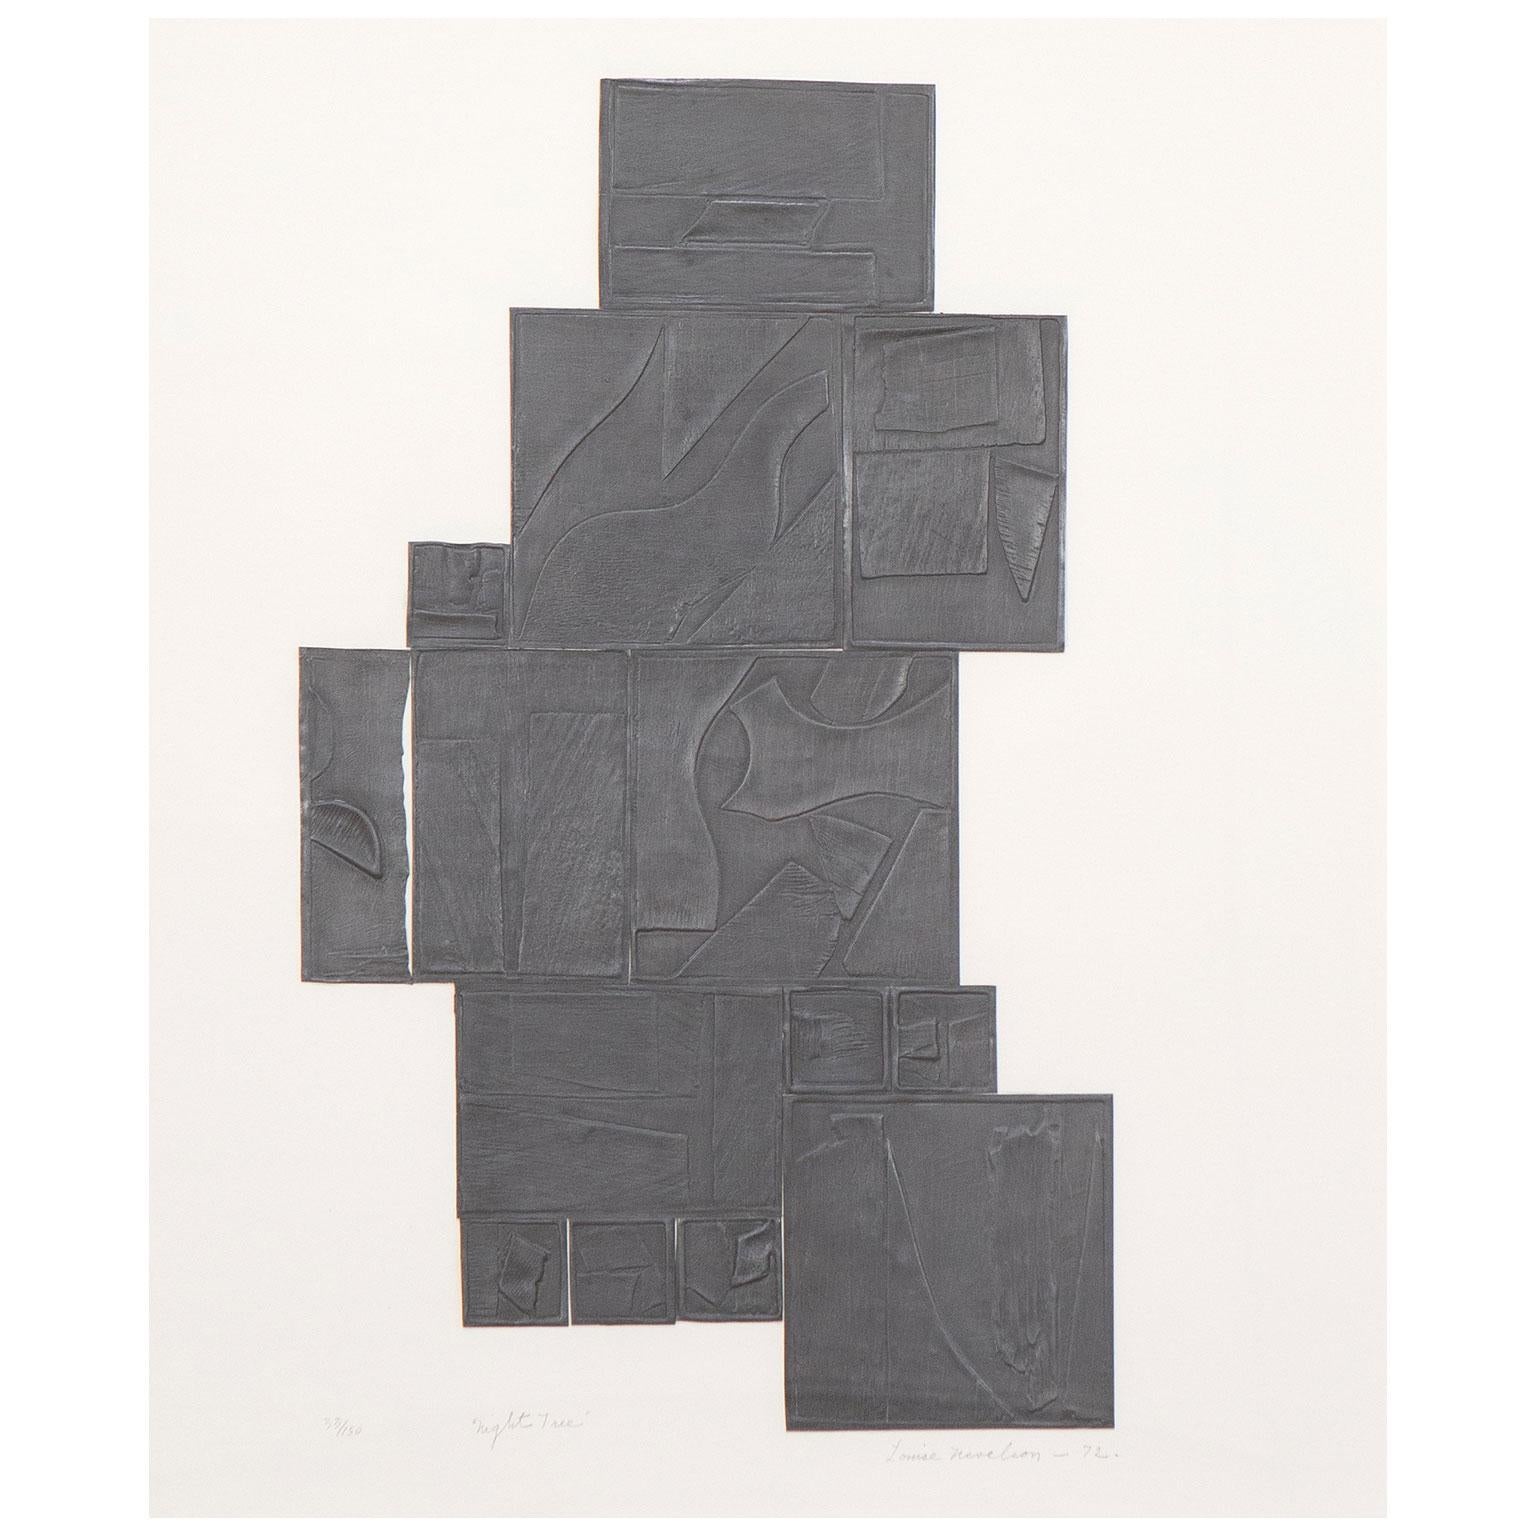 As always, Caviar20 is thrilled to present the esteemed work of Louise Nevelson - one of the most revered and unique artists of the 20th century.  (Also, an artist who continues to be undervalued - compared to her male contemporaries...On the plus